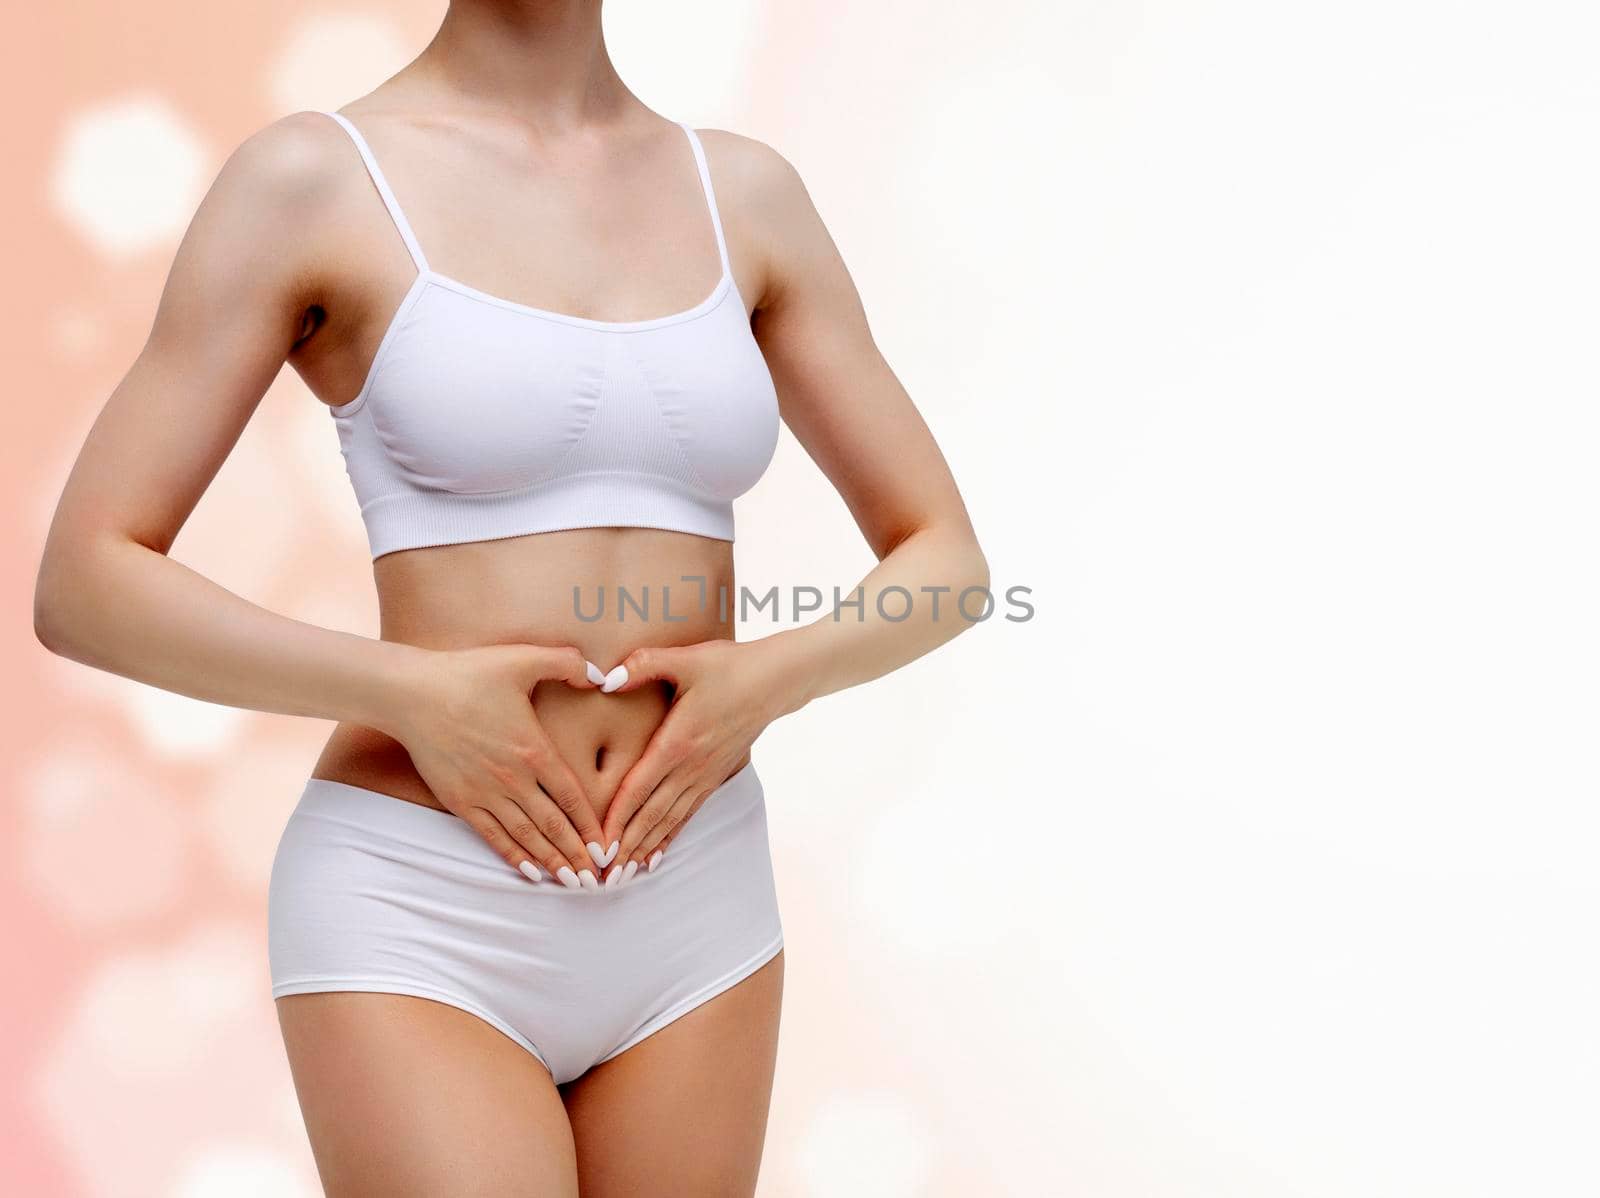 Slim woman in white underwear forming a heart symbol with her hands on her belly against an abstract background with circles and copyspace